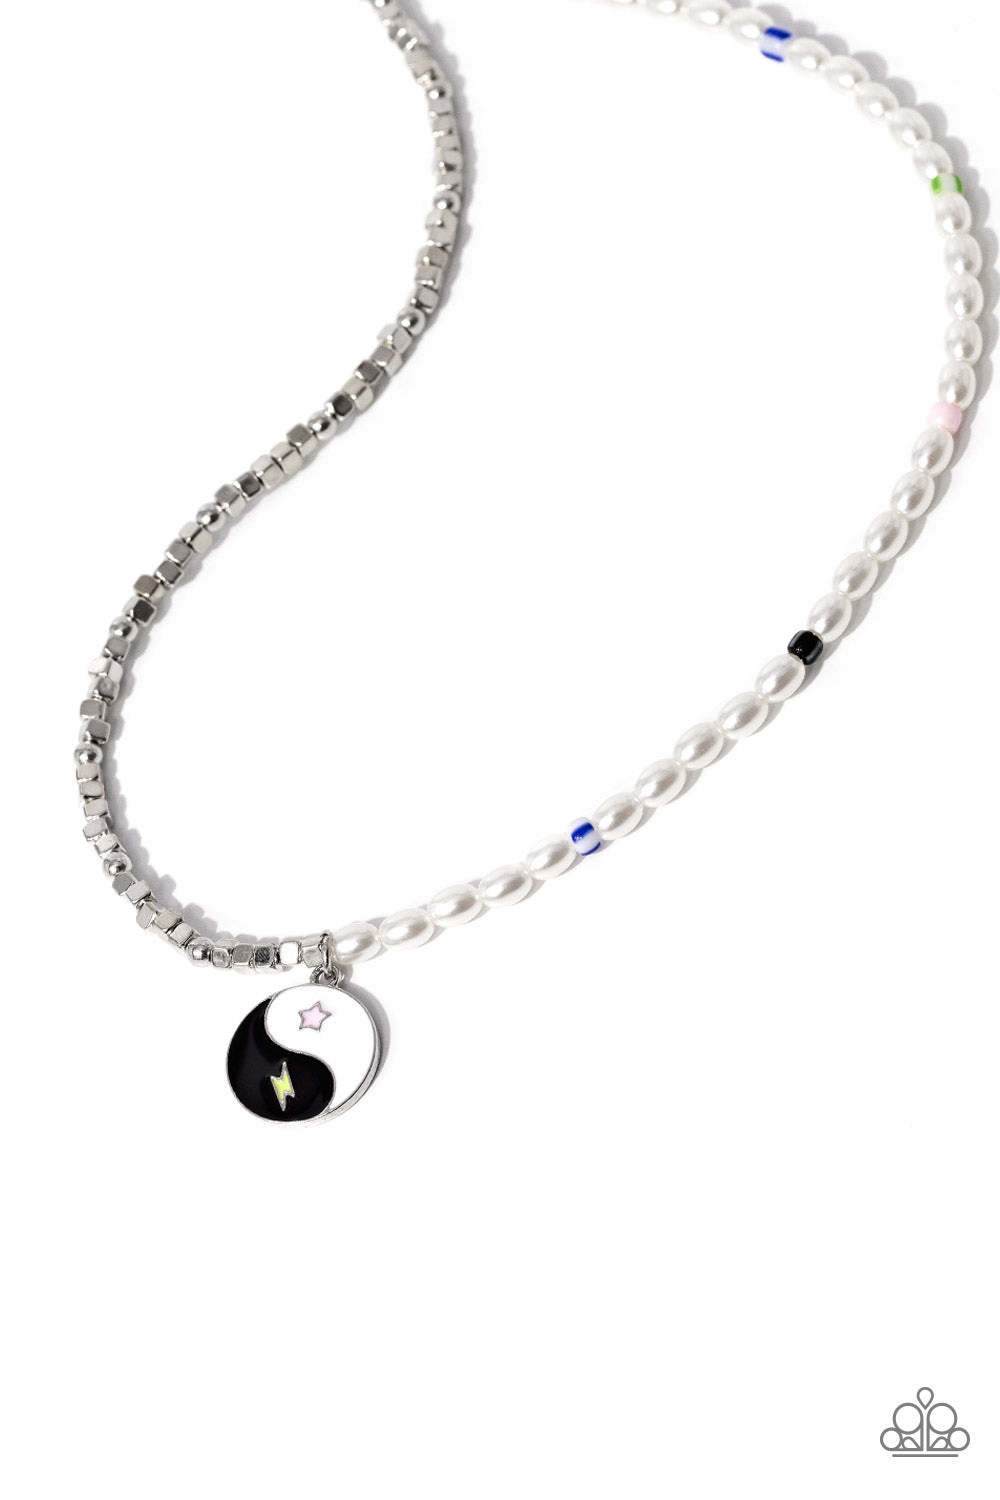 Youthful Yin and Yang Black Necklace - Paparazzi Accessories  A strand of oval white pearls, sporadically infused with multicolored-striped beads, collides with cubed silver beads and studs to create an abstract blend of elegance and sheen. A yin-yang charm featuring white and black accents and star and Kohlrabi lightning bolt symbols dangles from the bottom of the contrasting design for the perfect balance of color. Features an adjustable clasp closure. P2DA-BKXX-191XX